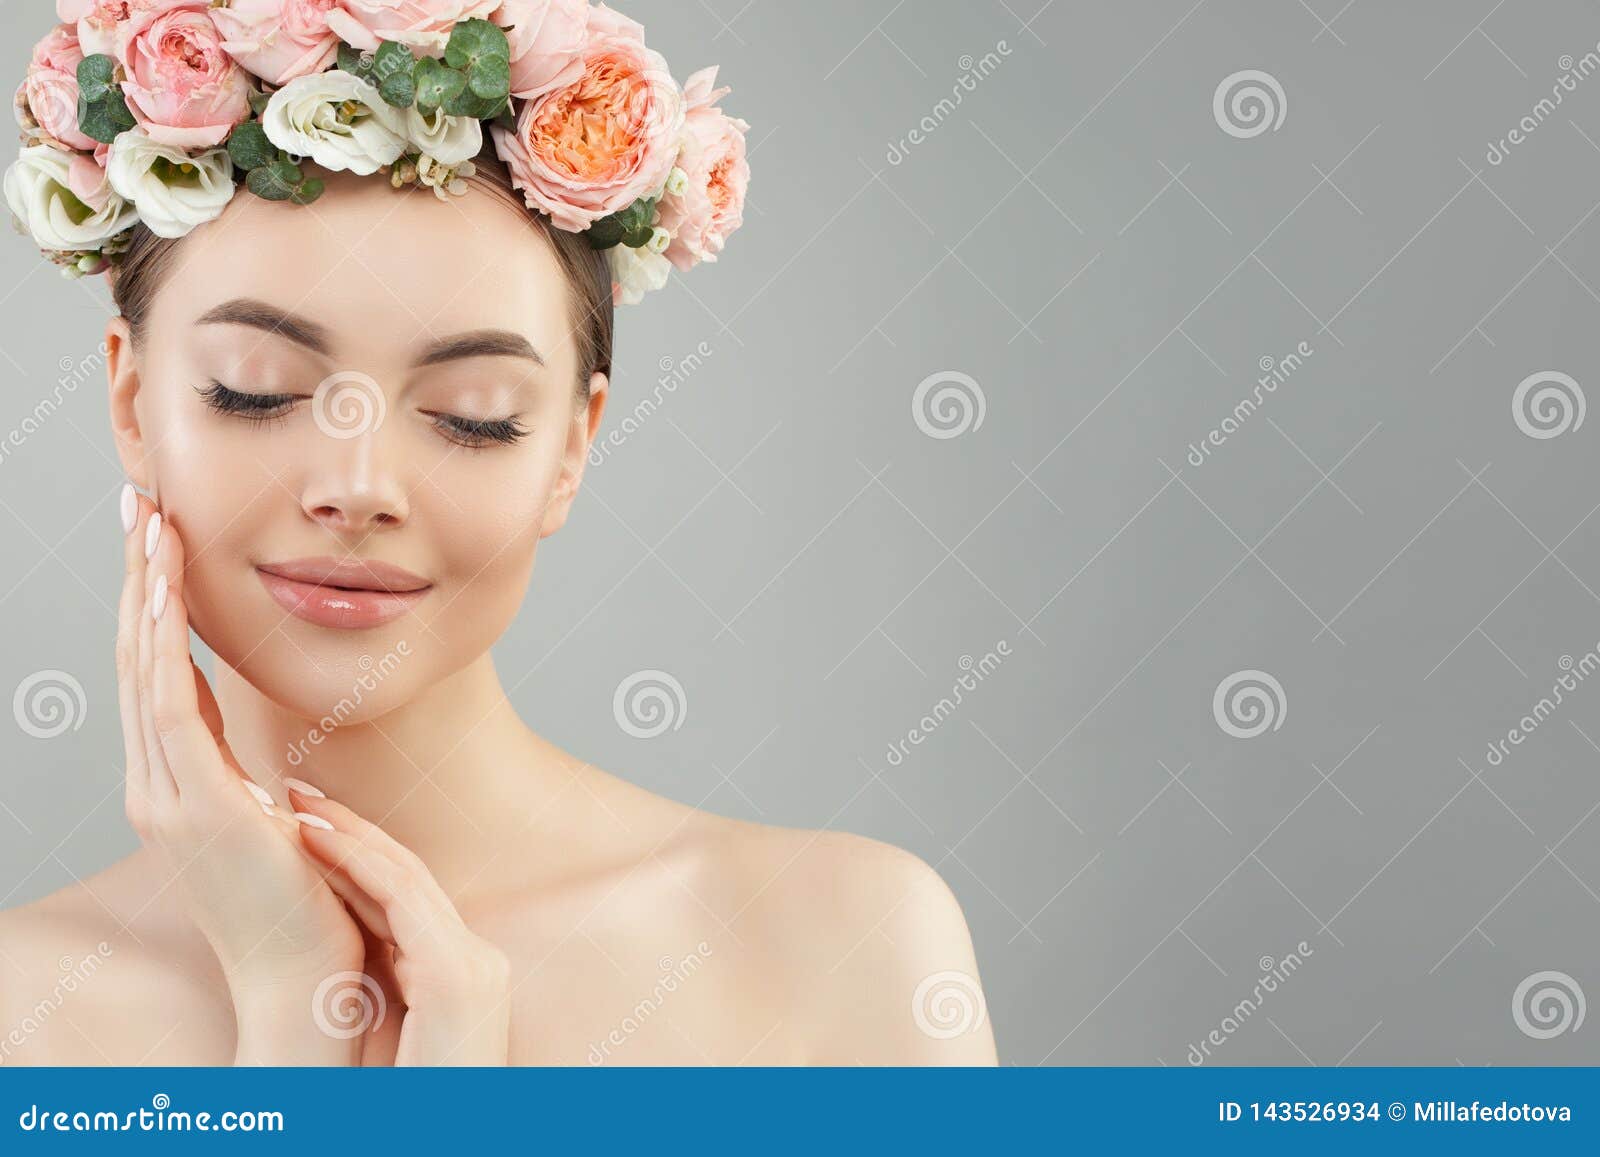 beautiful woman touching her face her hand. pretty candid girl with flowers. facial treatment, face lifting, anti aging